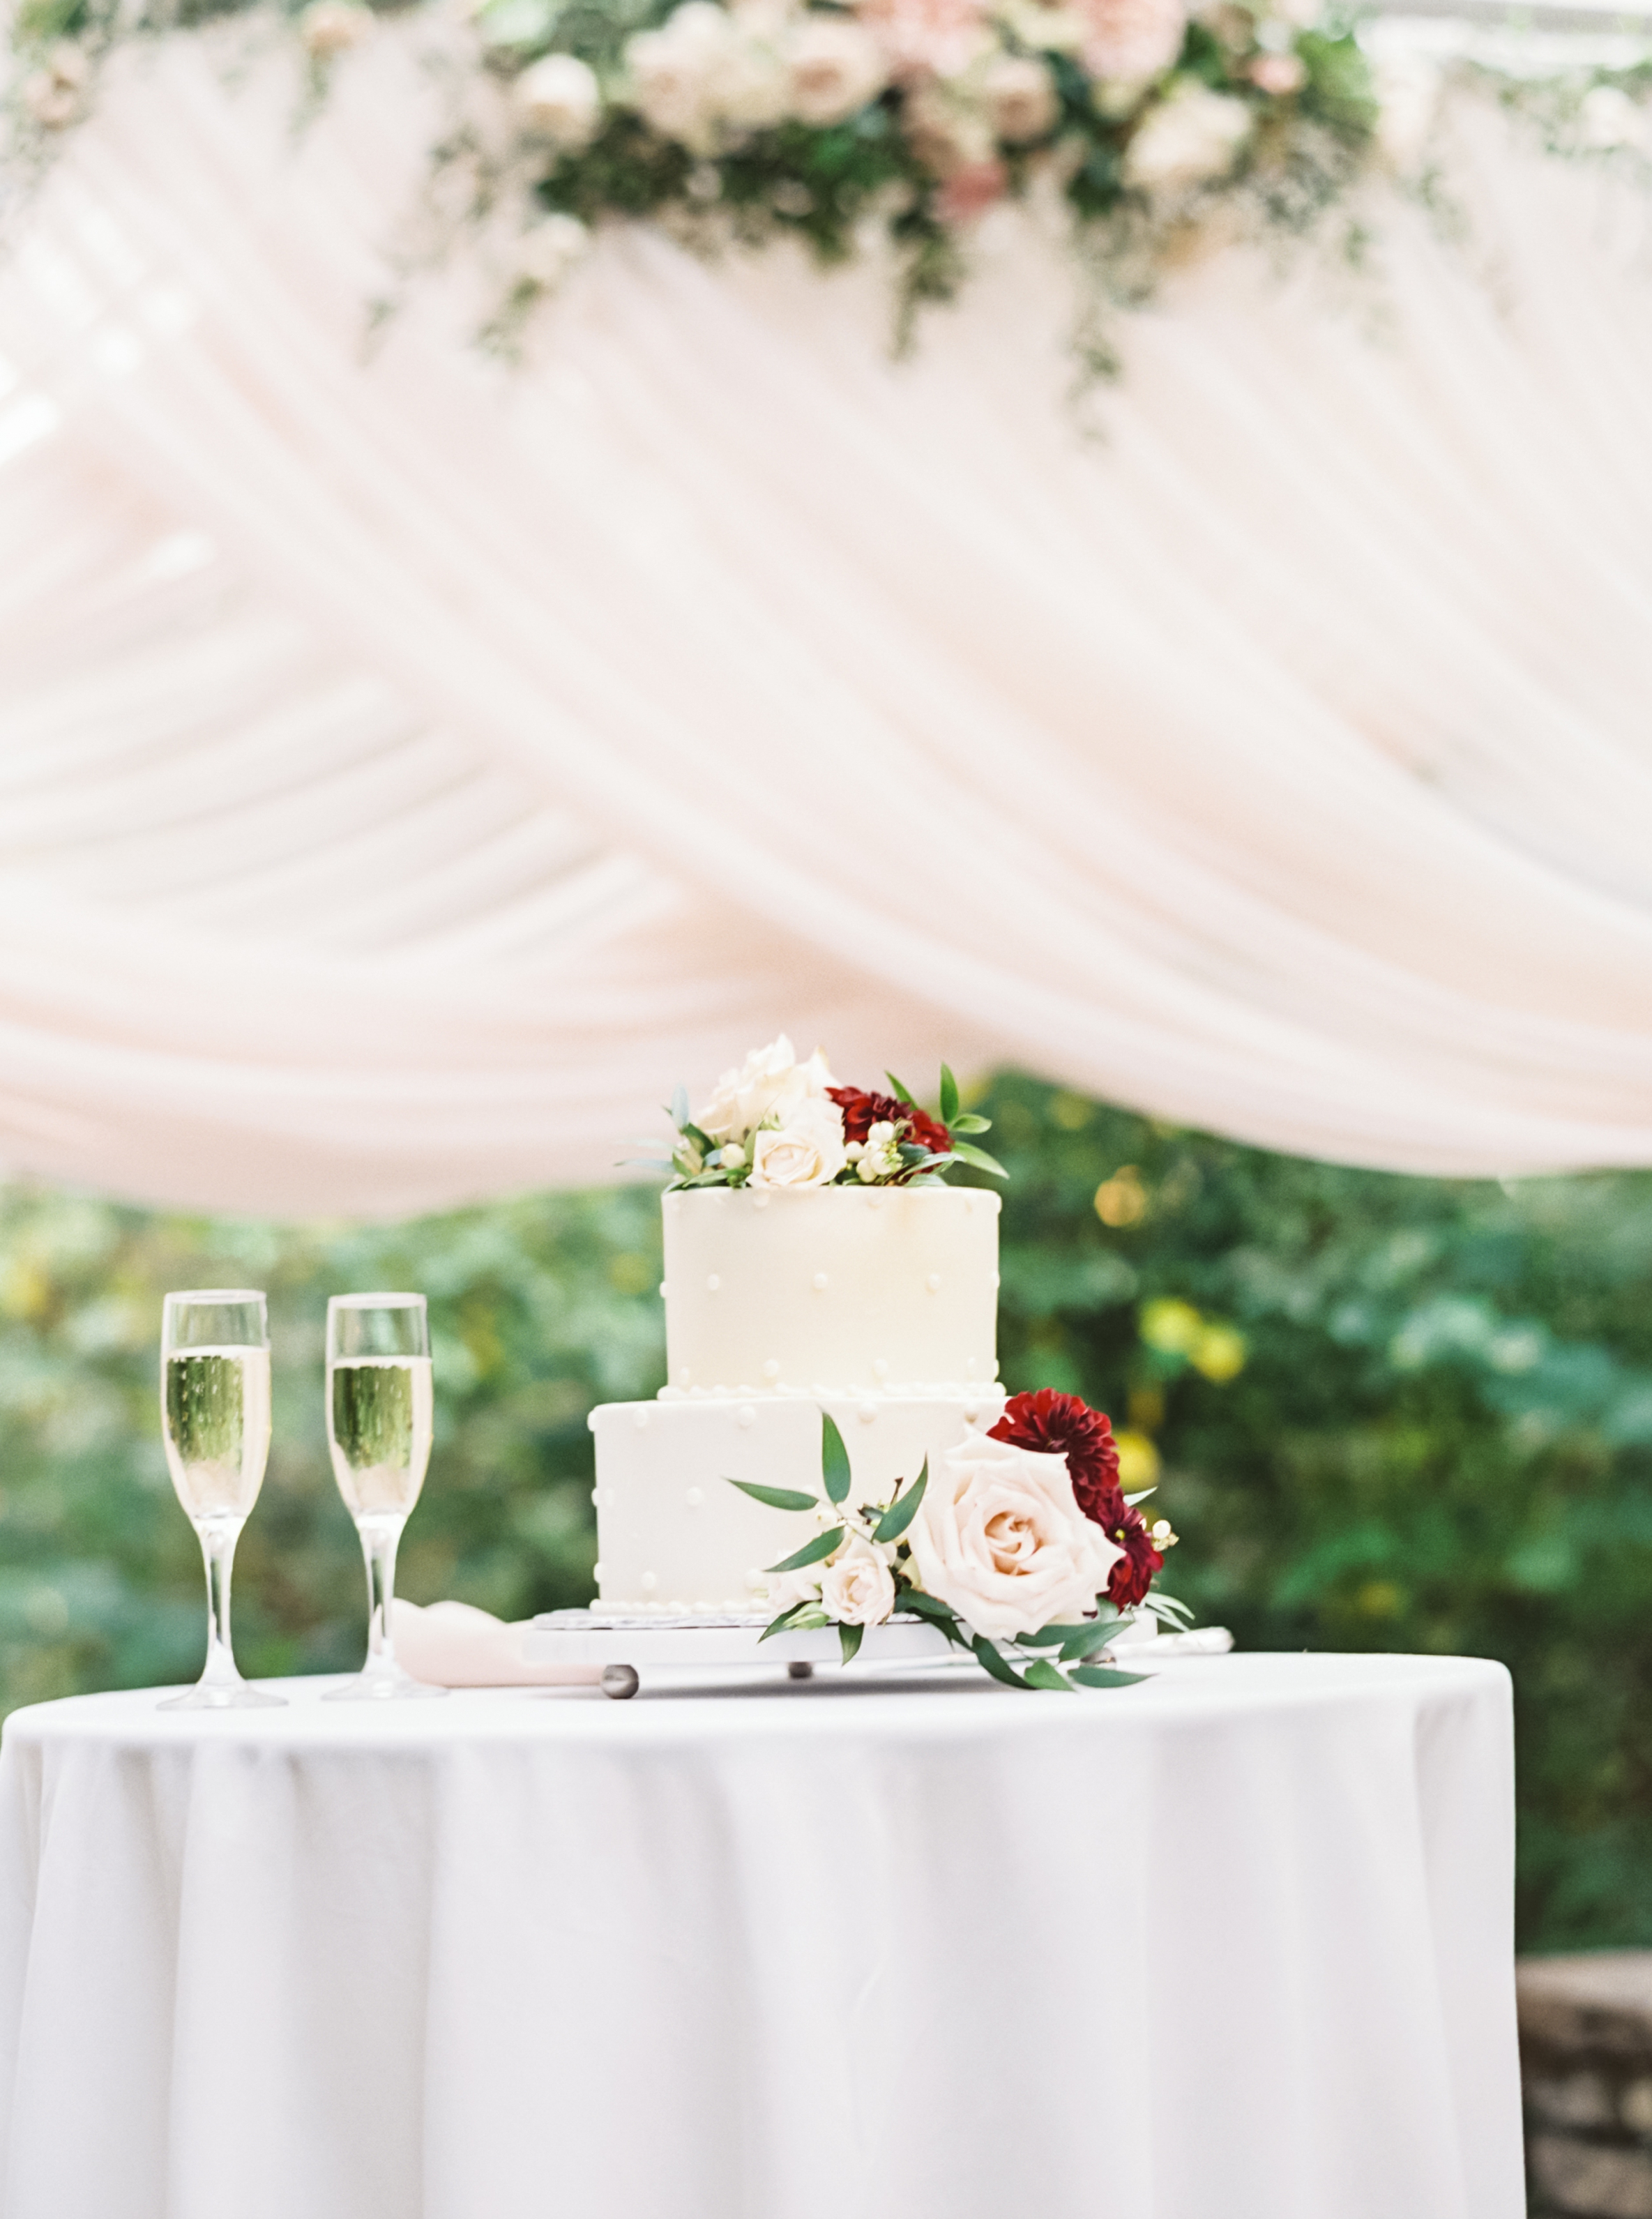 Cake Table, Champagne Flutes, Wedding Reception